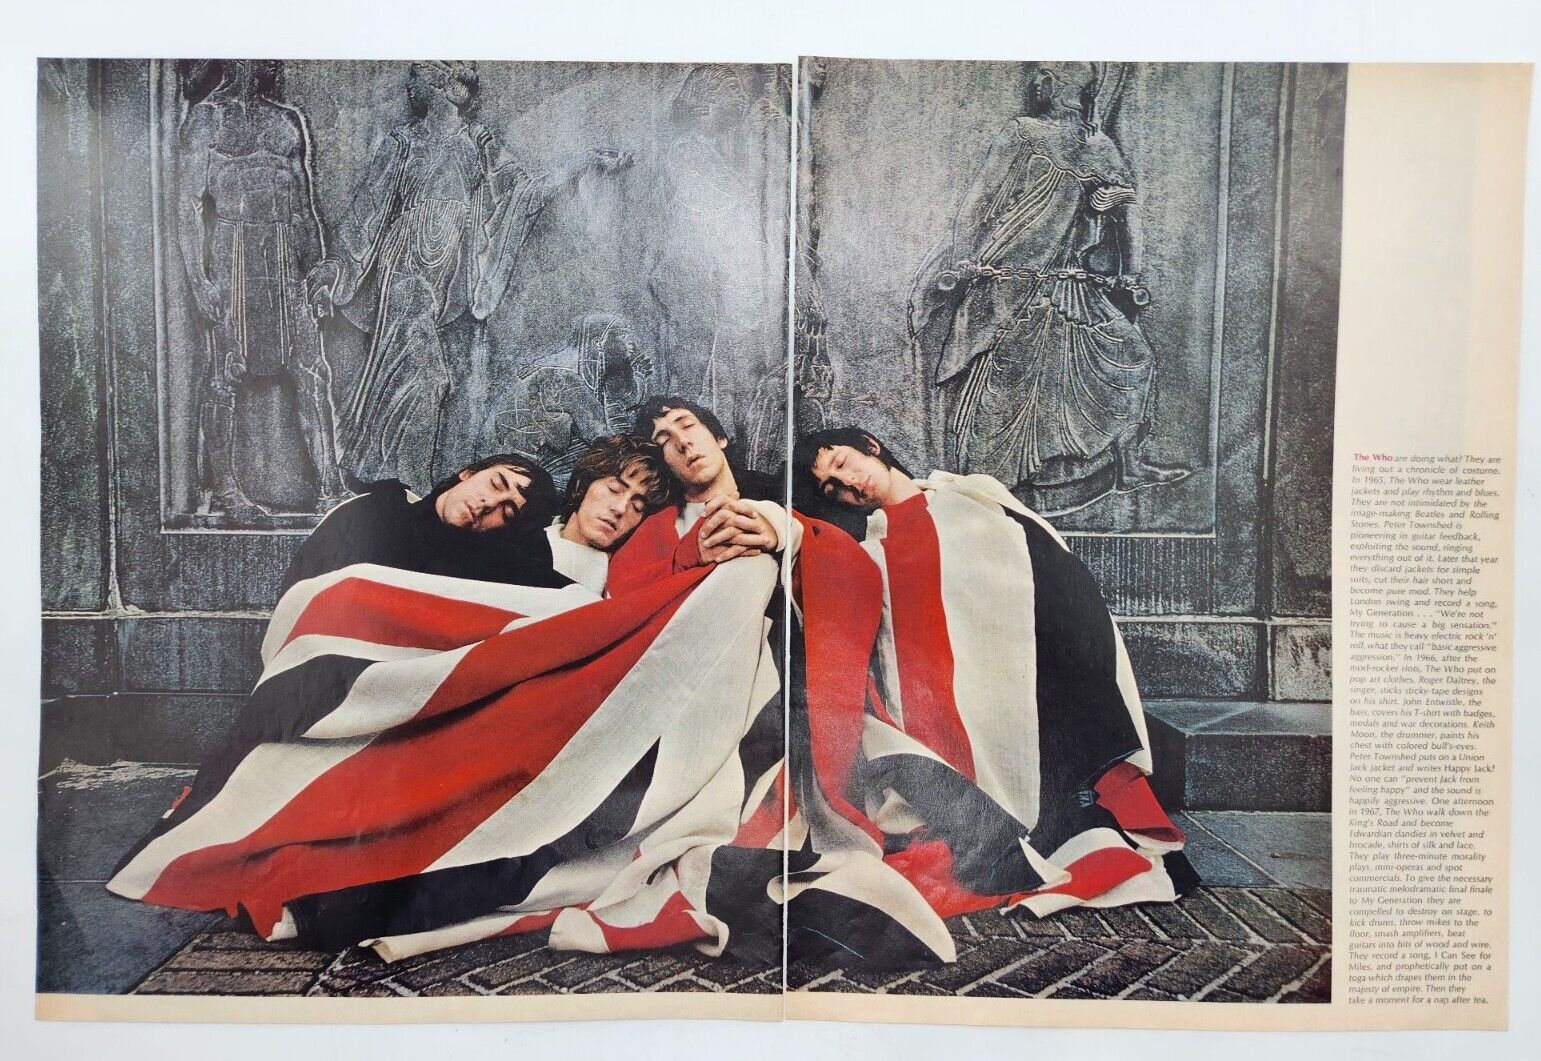 1968 The Who Daltrey Moon Townshed Entwistle Print Ad Man Cave Poster Art 60's